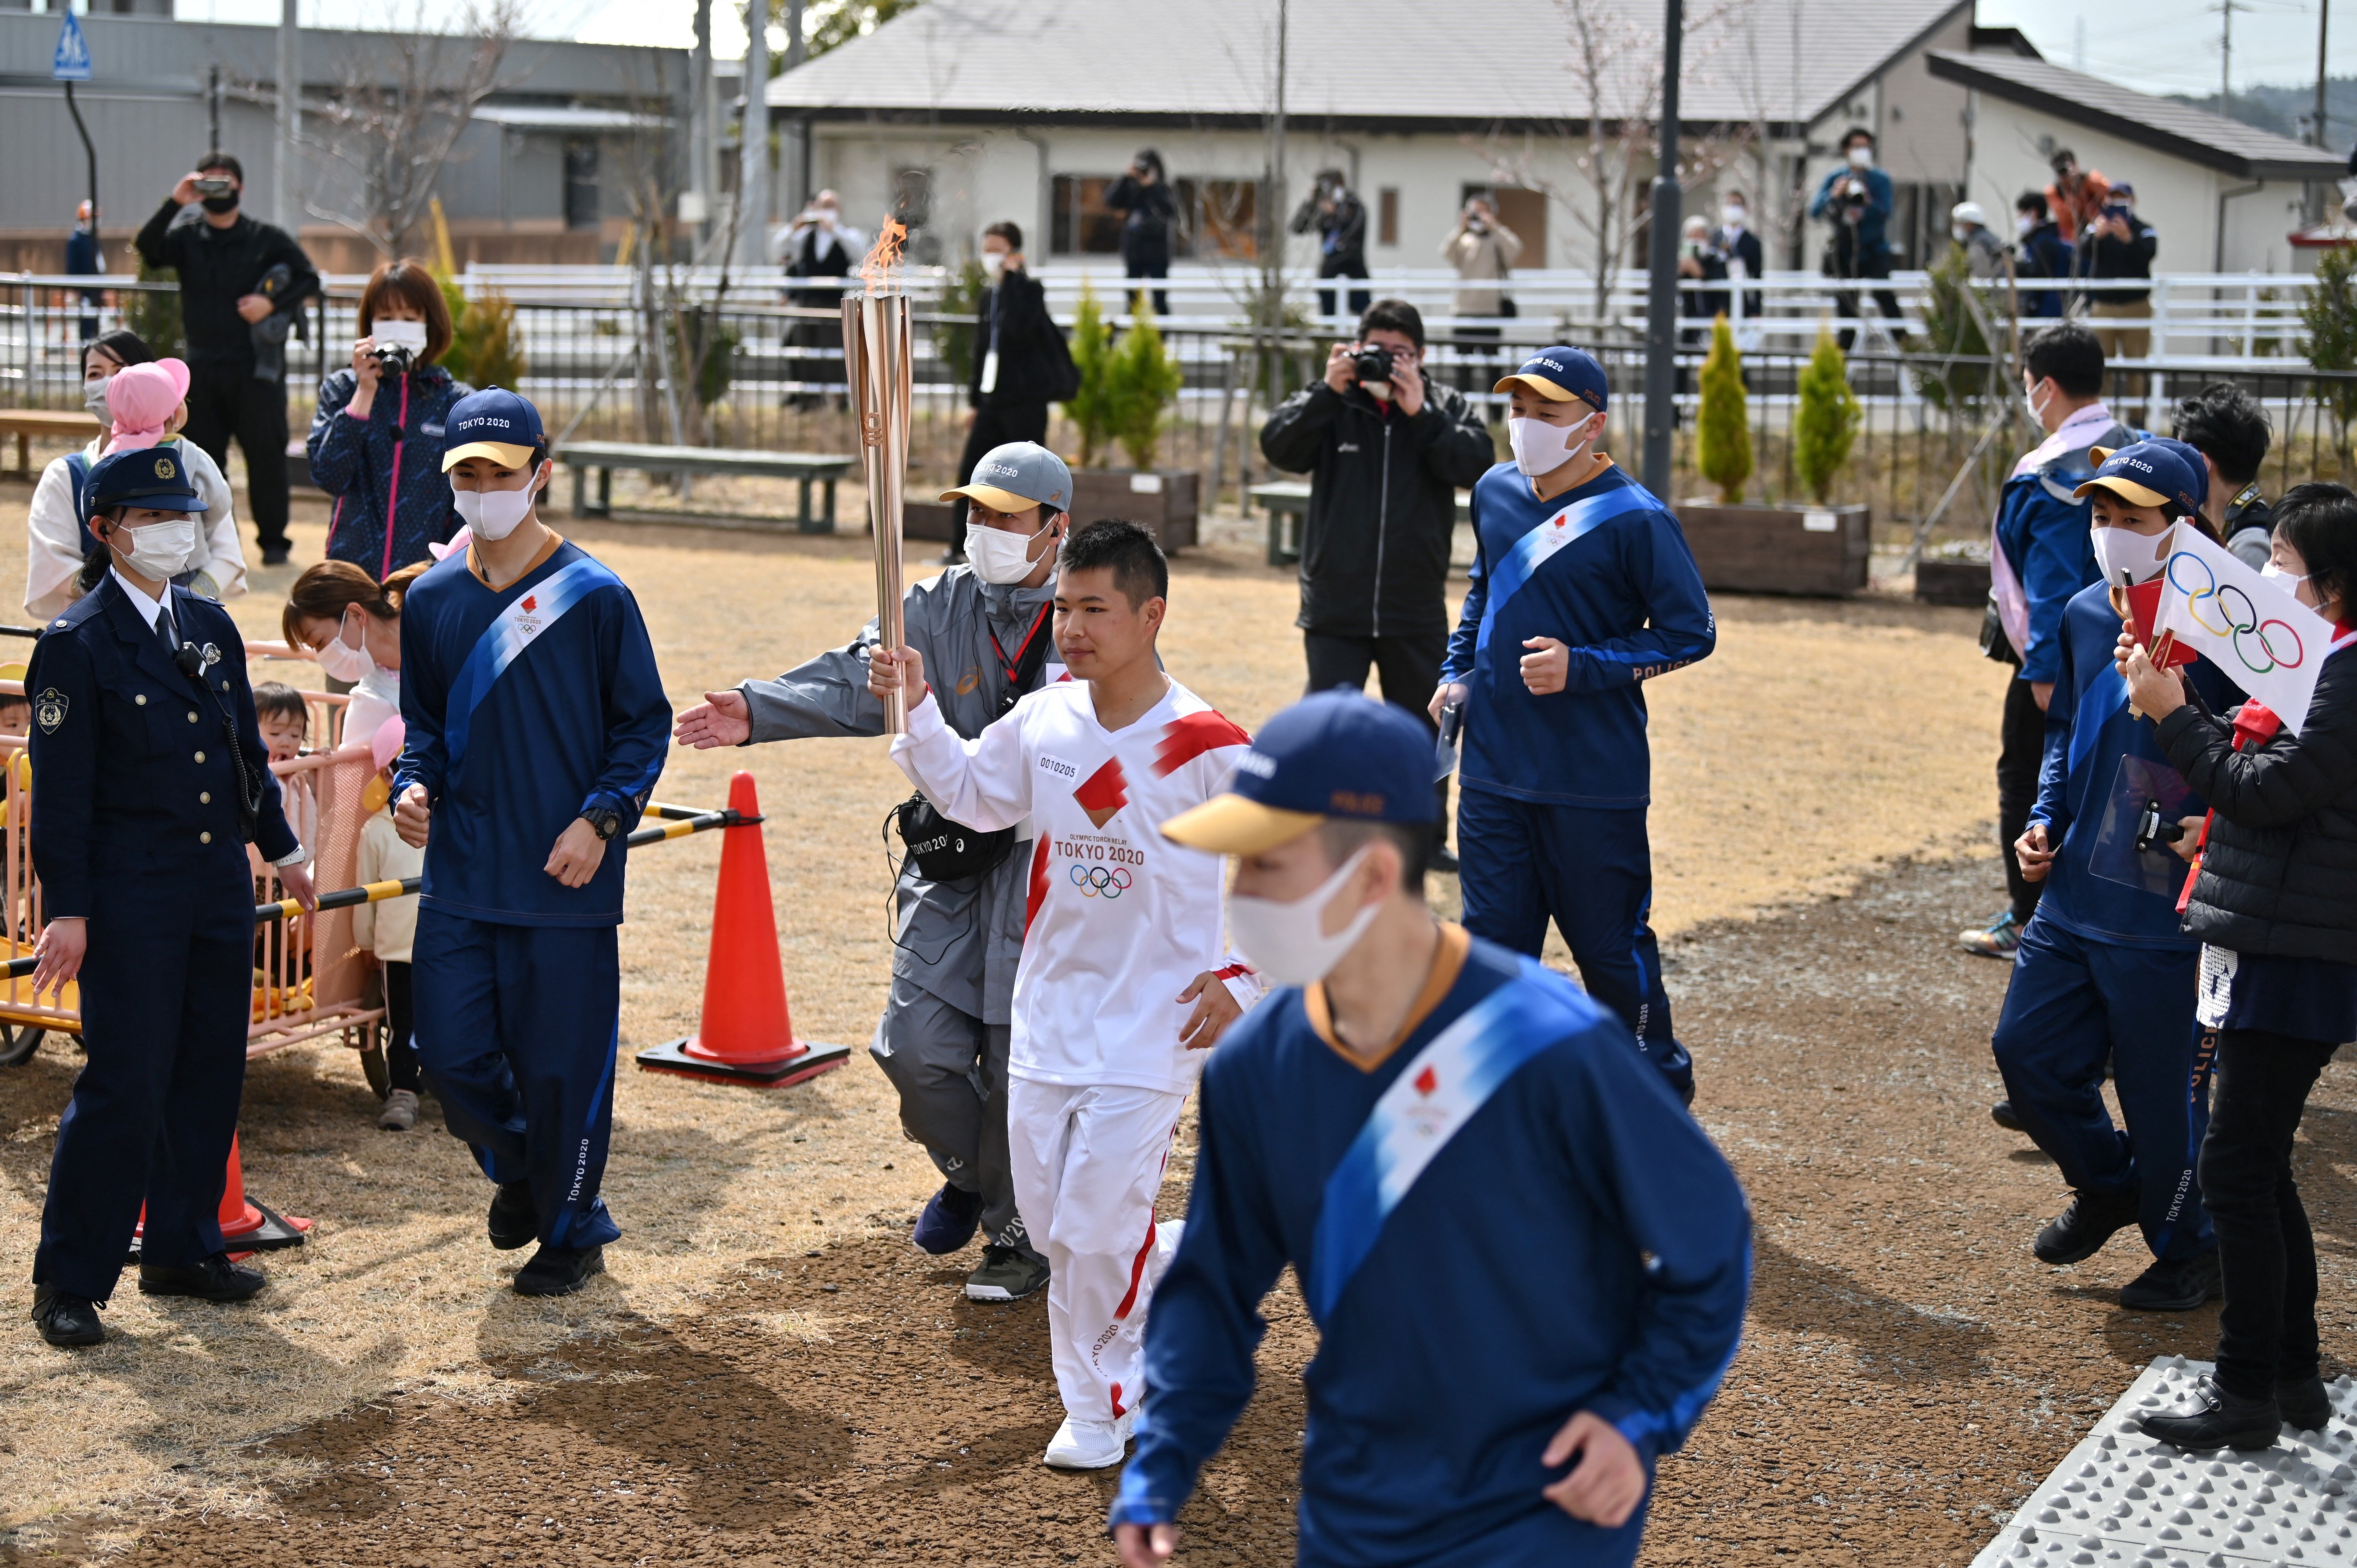 An athlete carries an Olympic torch during the first day of Tokyo 2020 Olympic Games torch relay in the town of Naraha, Fukushima Prefecture on March 25